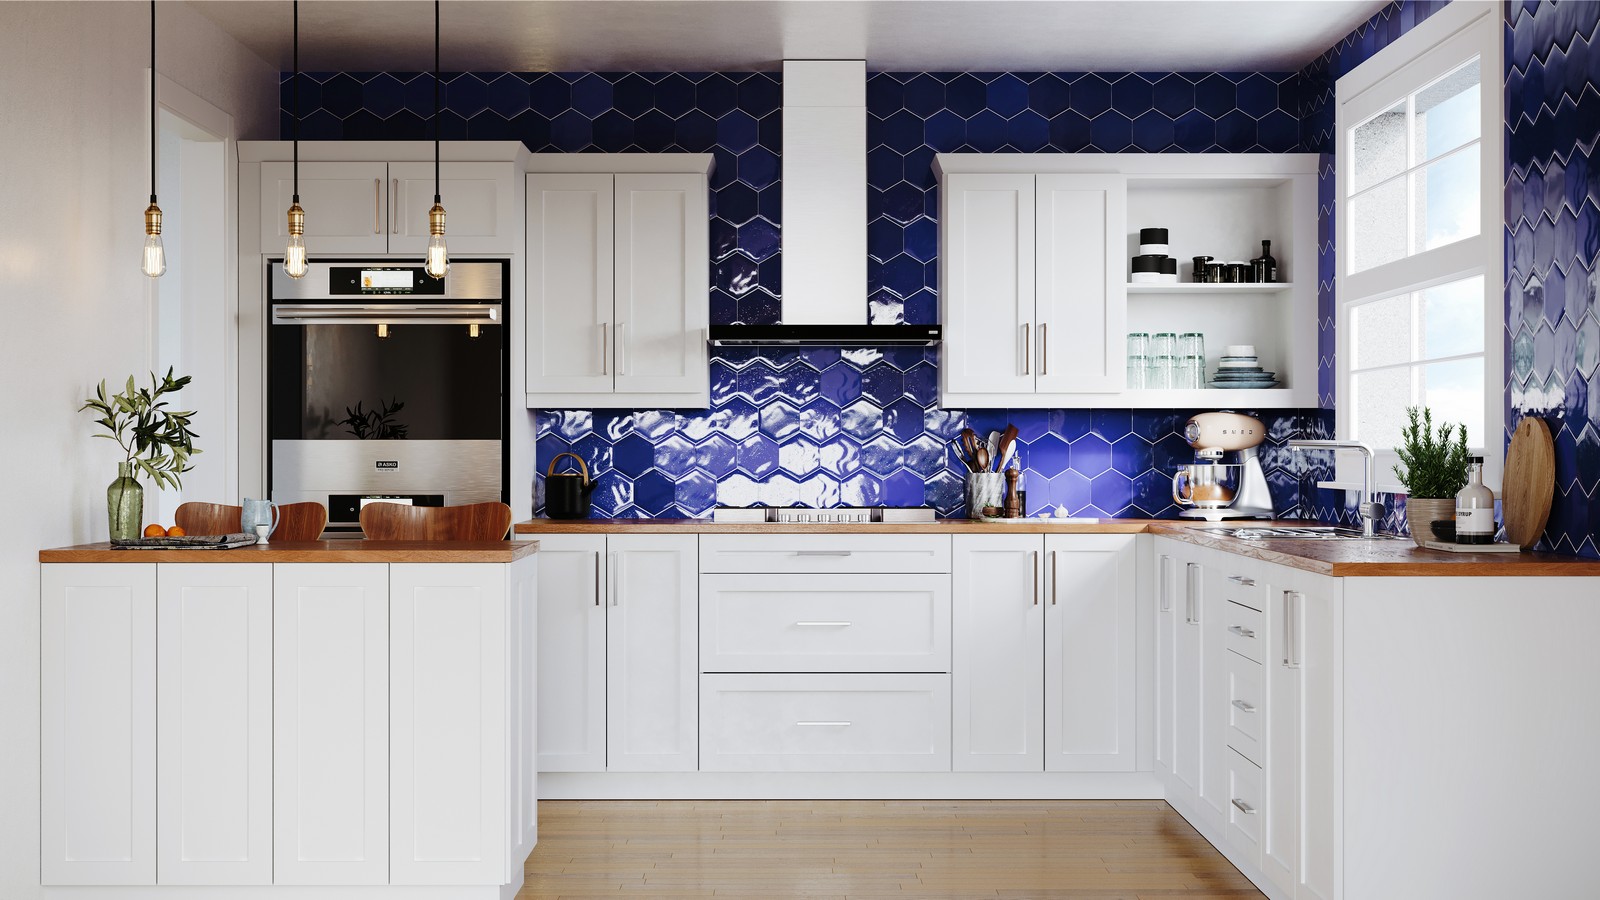 Kitchen beauty shots showcasing the cabinetry style - , 1